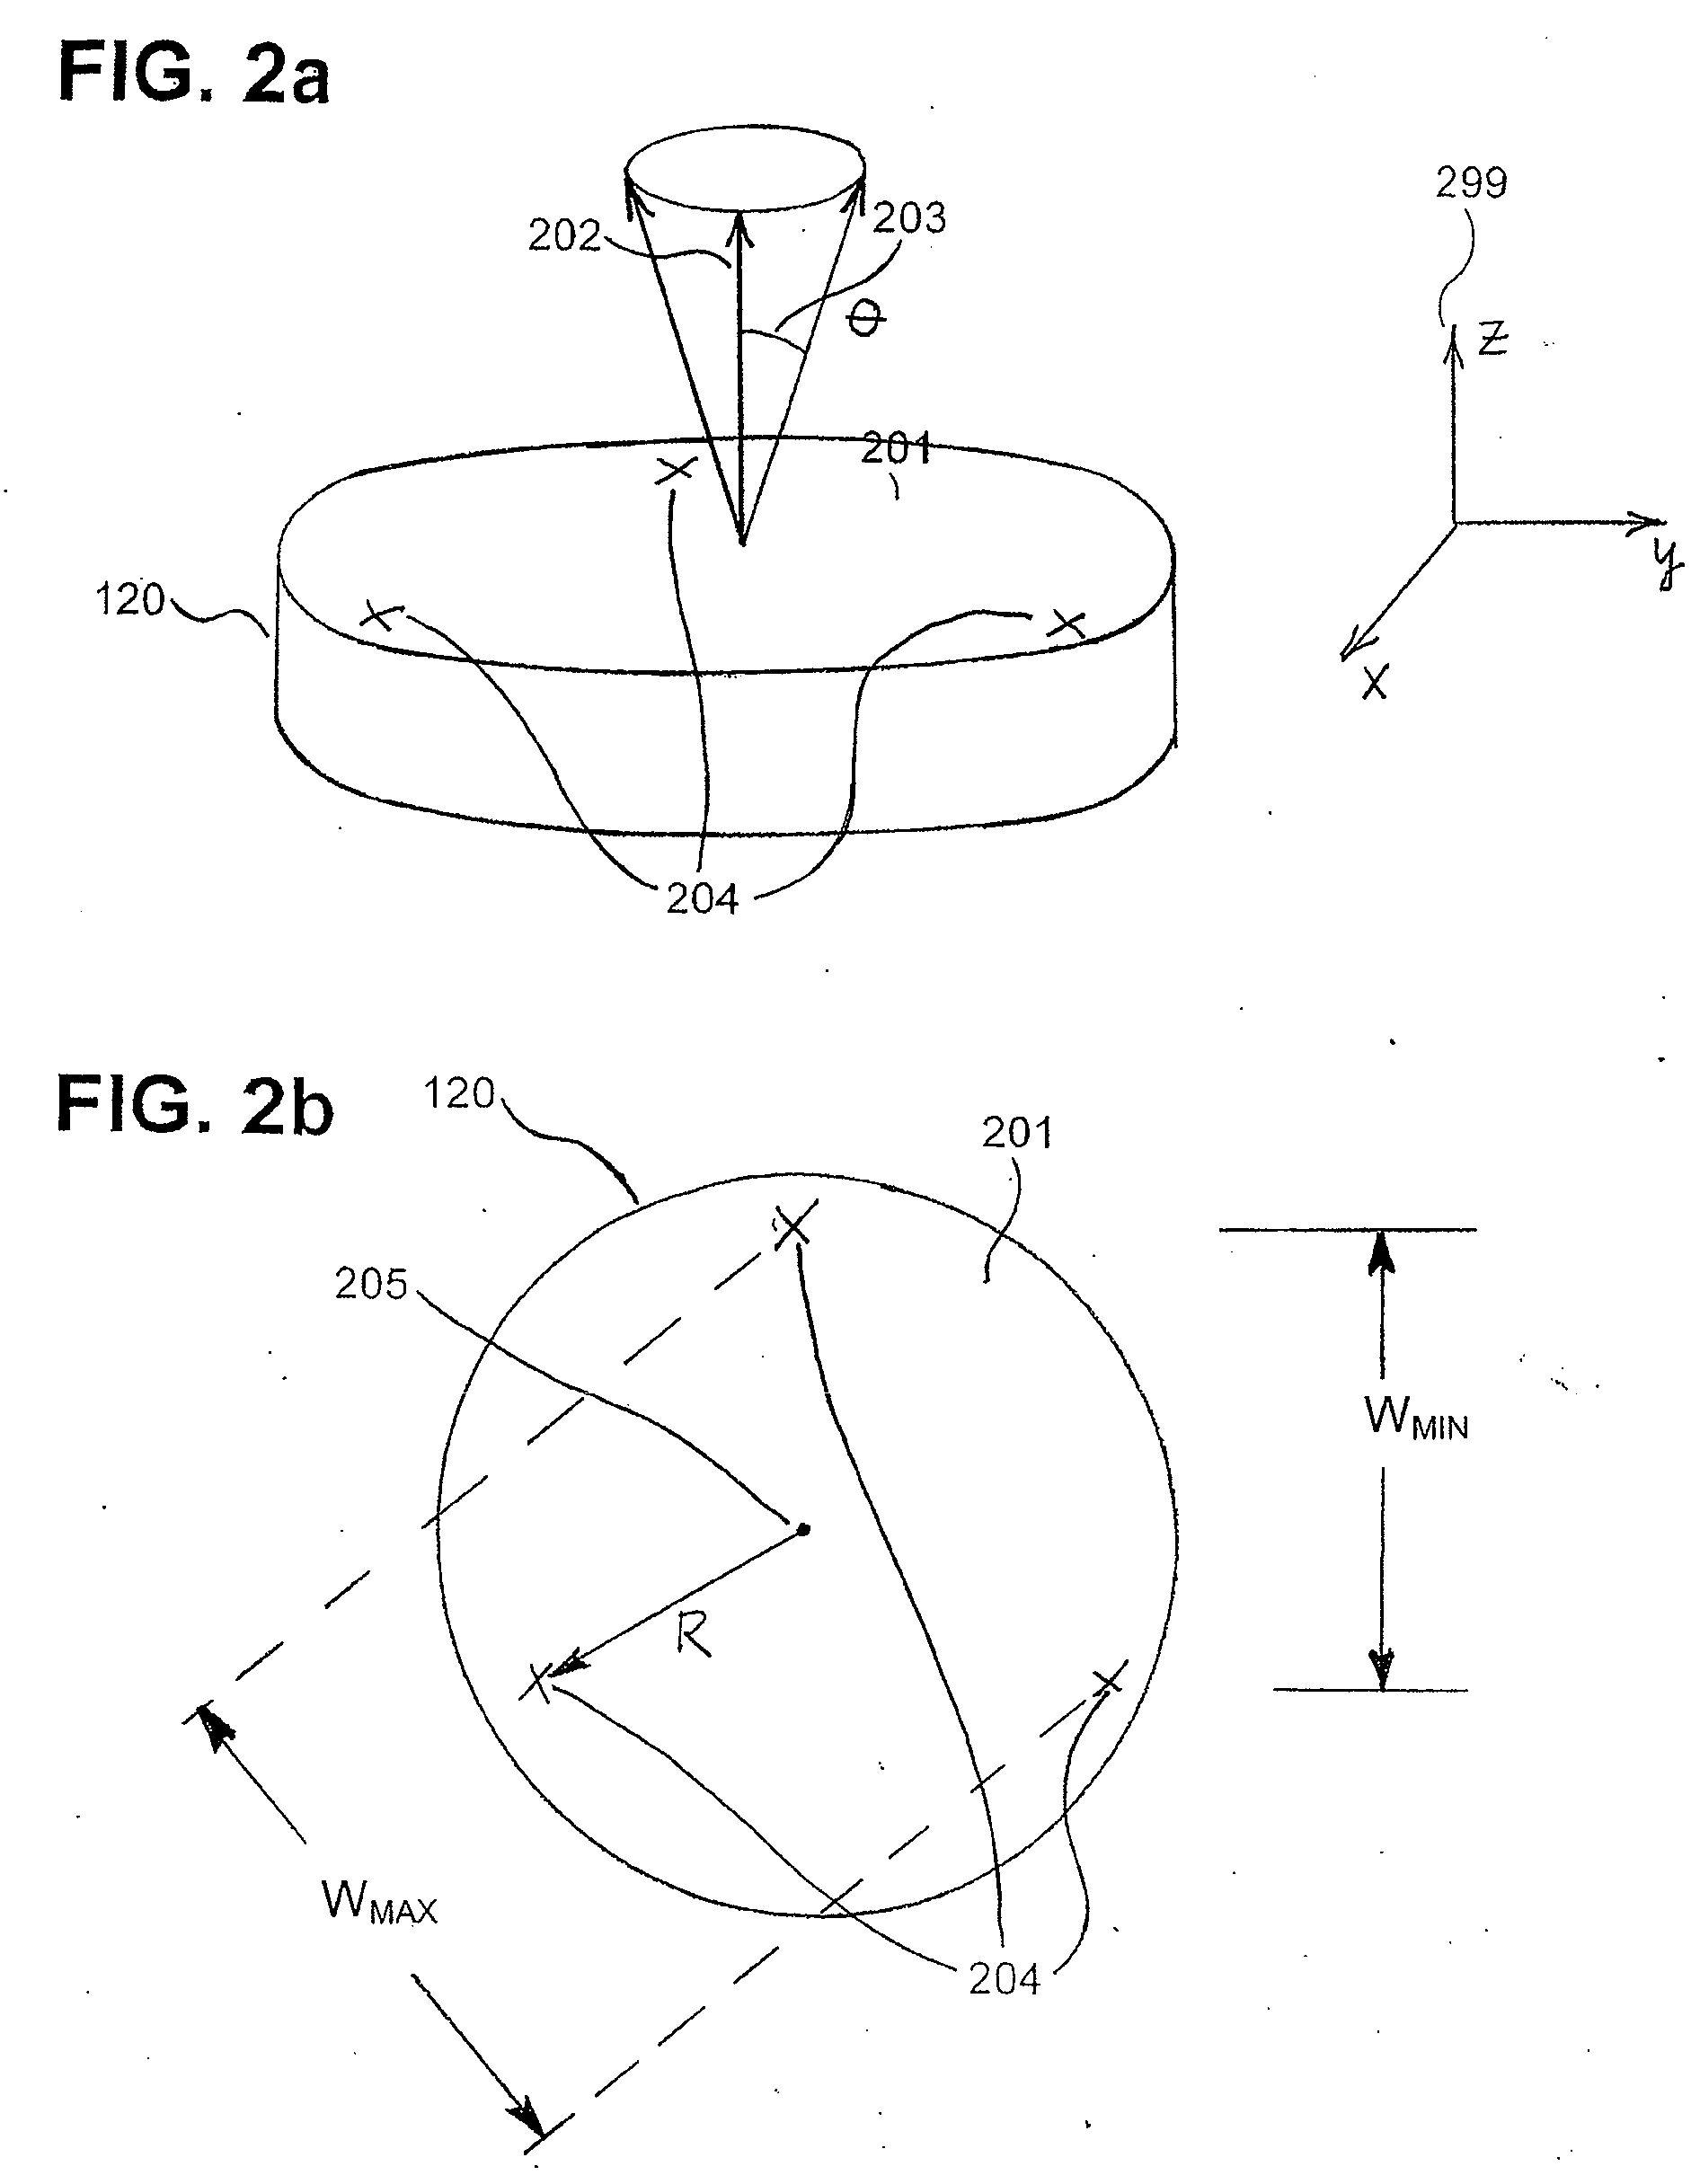 Reliable contact and safe system and method for providing power to an electronic device